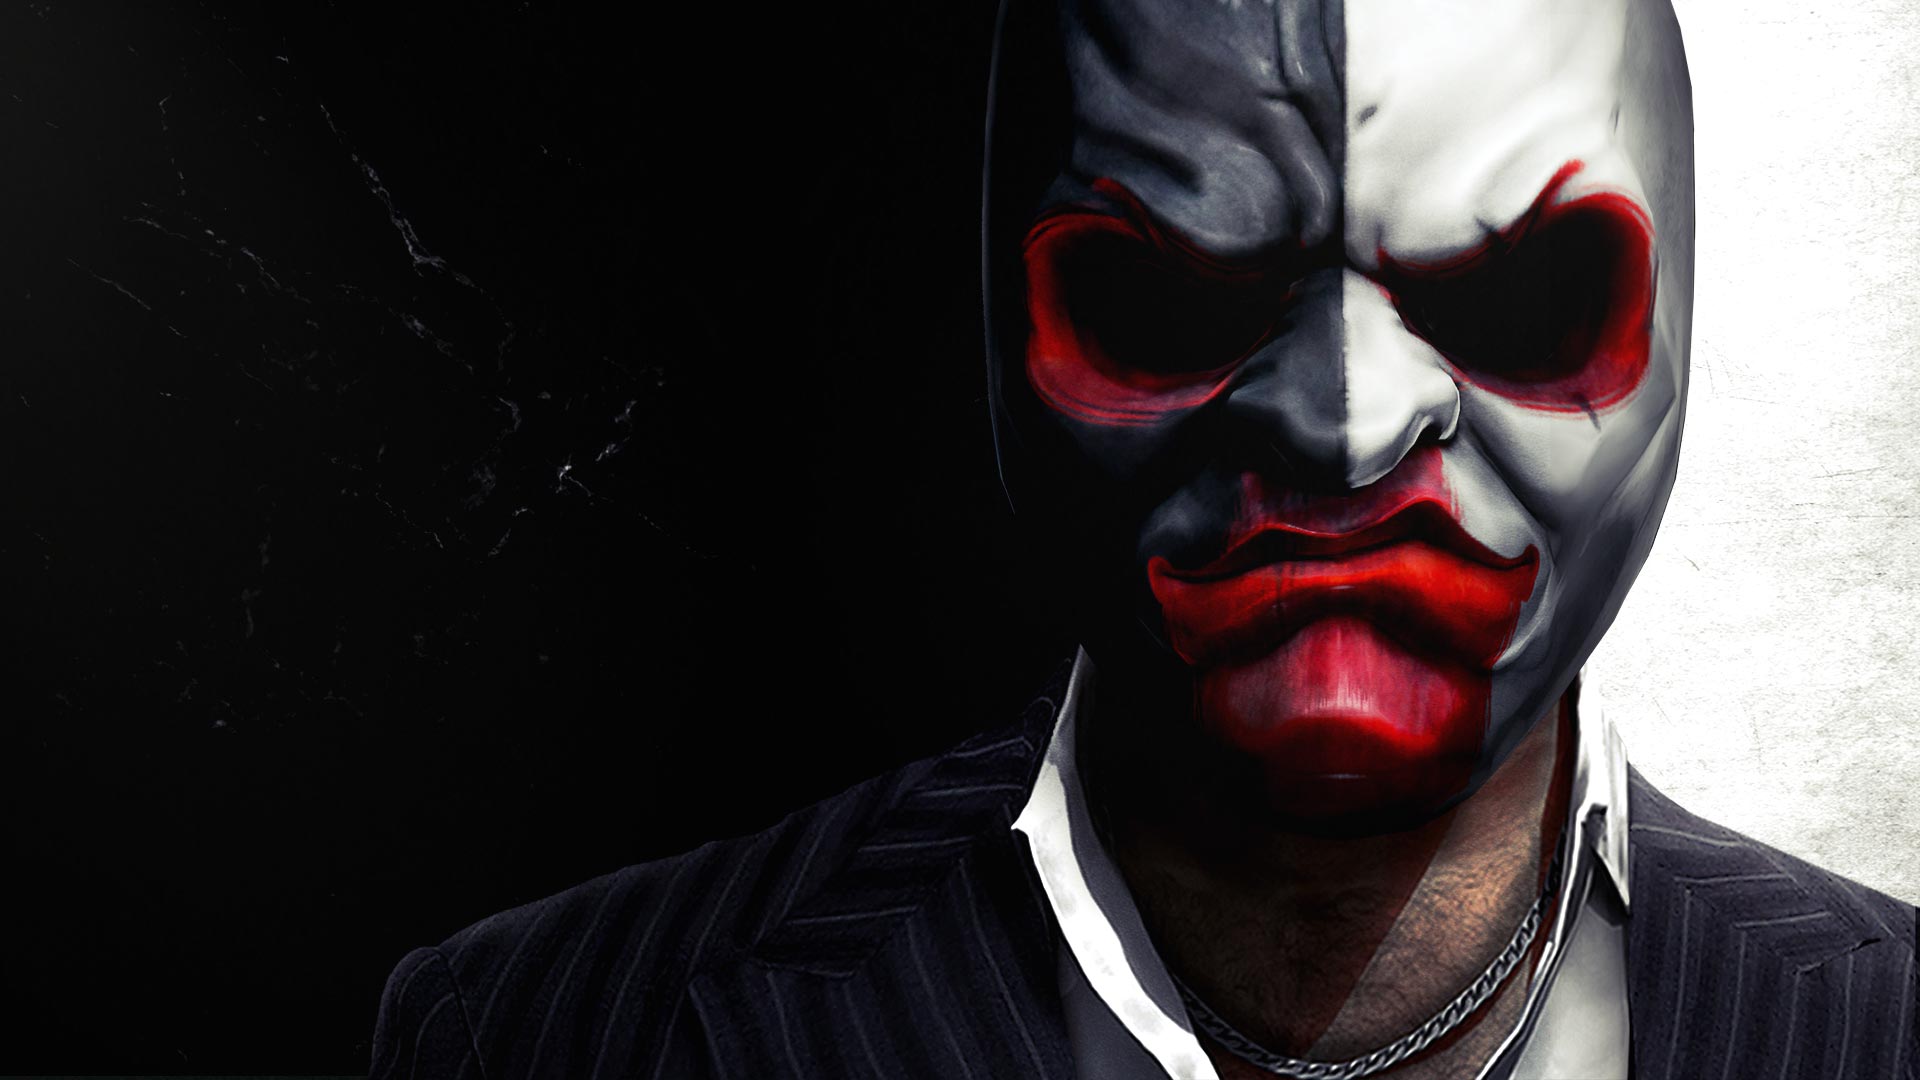 Payday Scarface - HD Wallpaper 